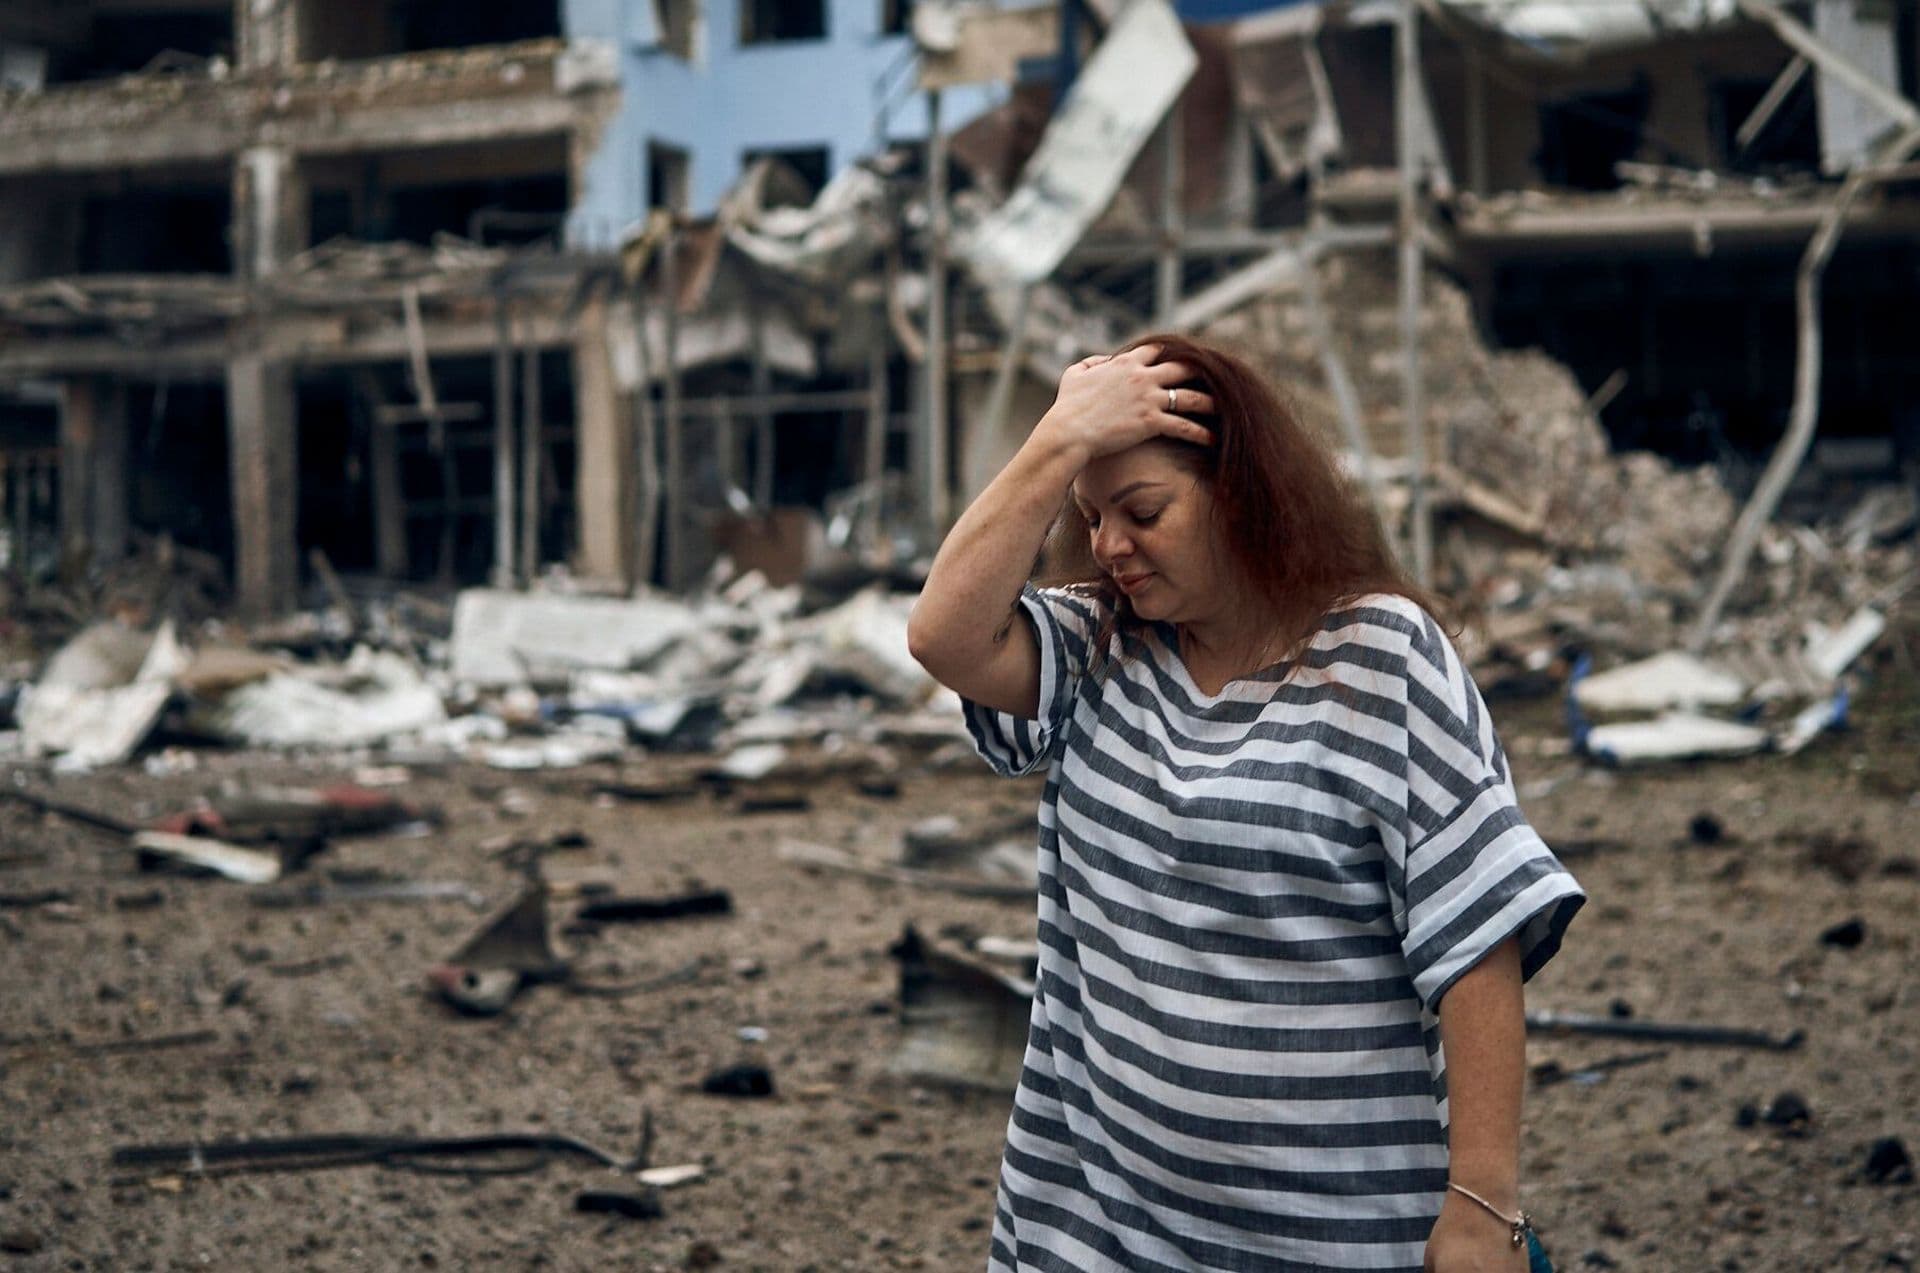 A woman stands amongst the debris after the Russian shelling in Mykolaiv